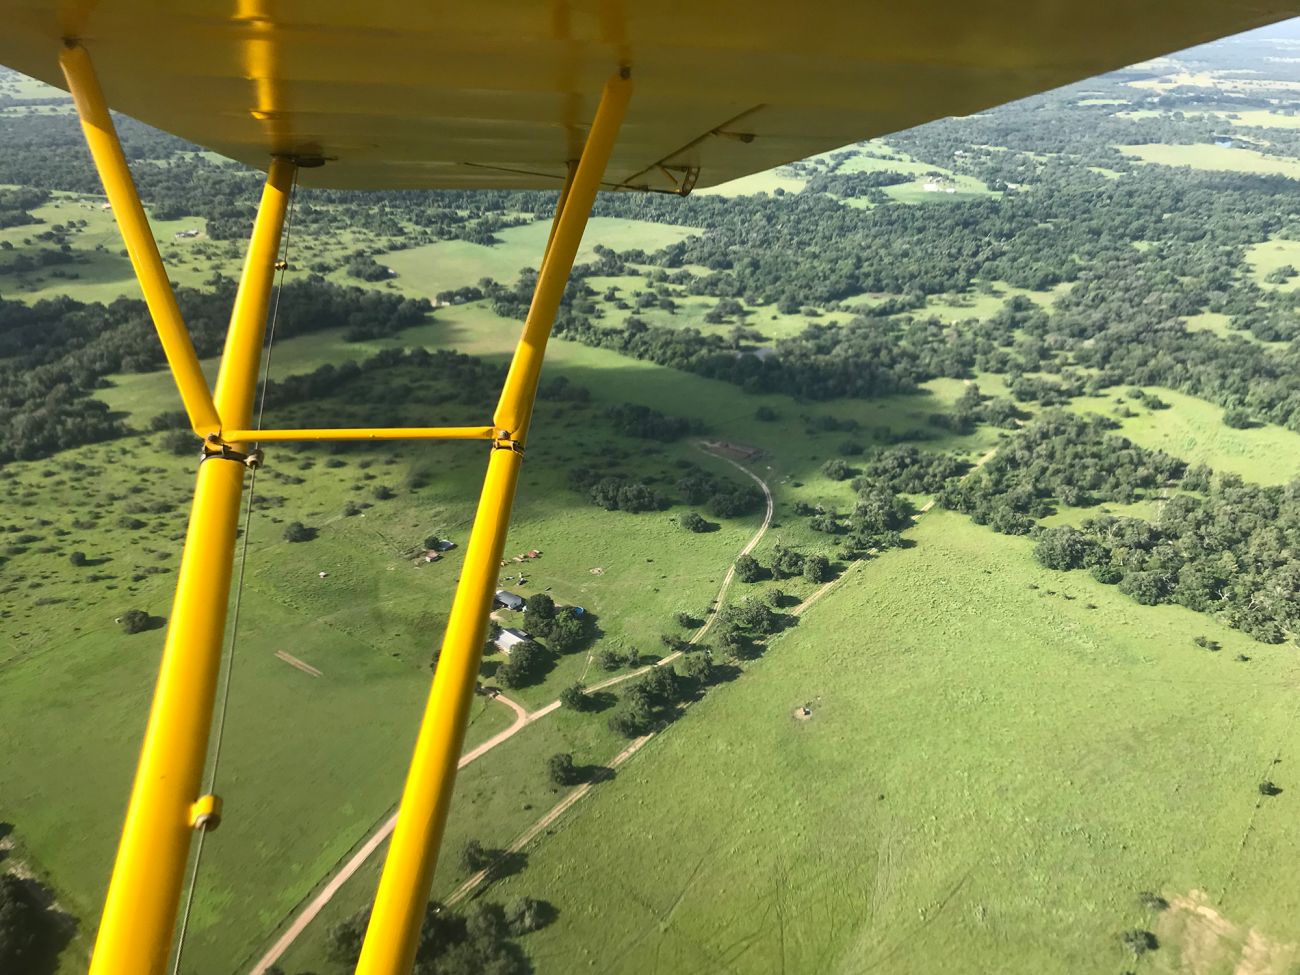 view from flying piper cub of lush green fields